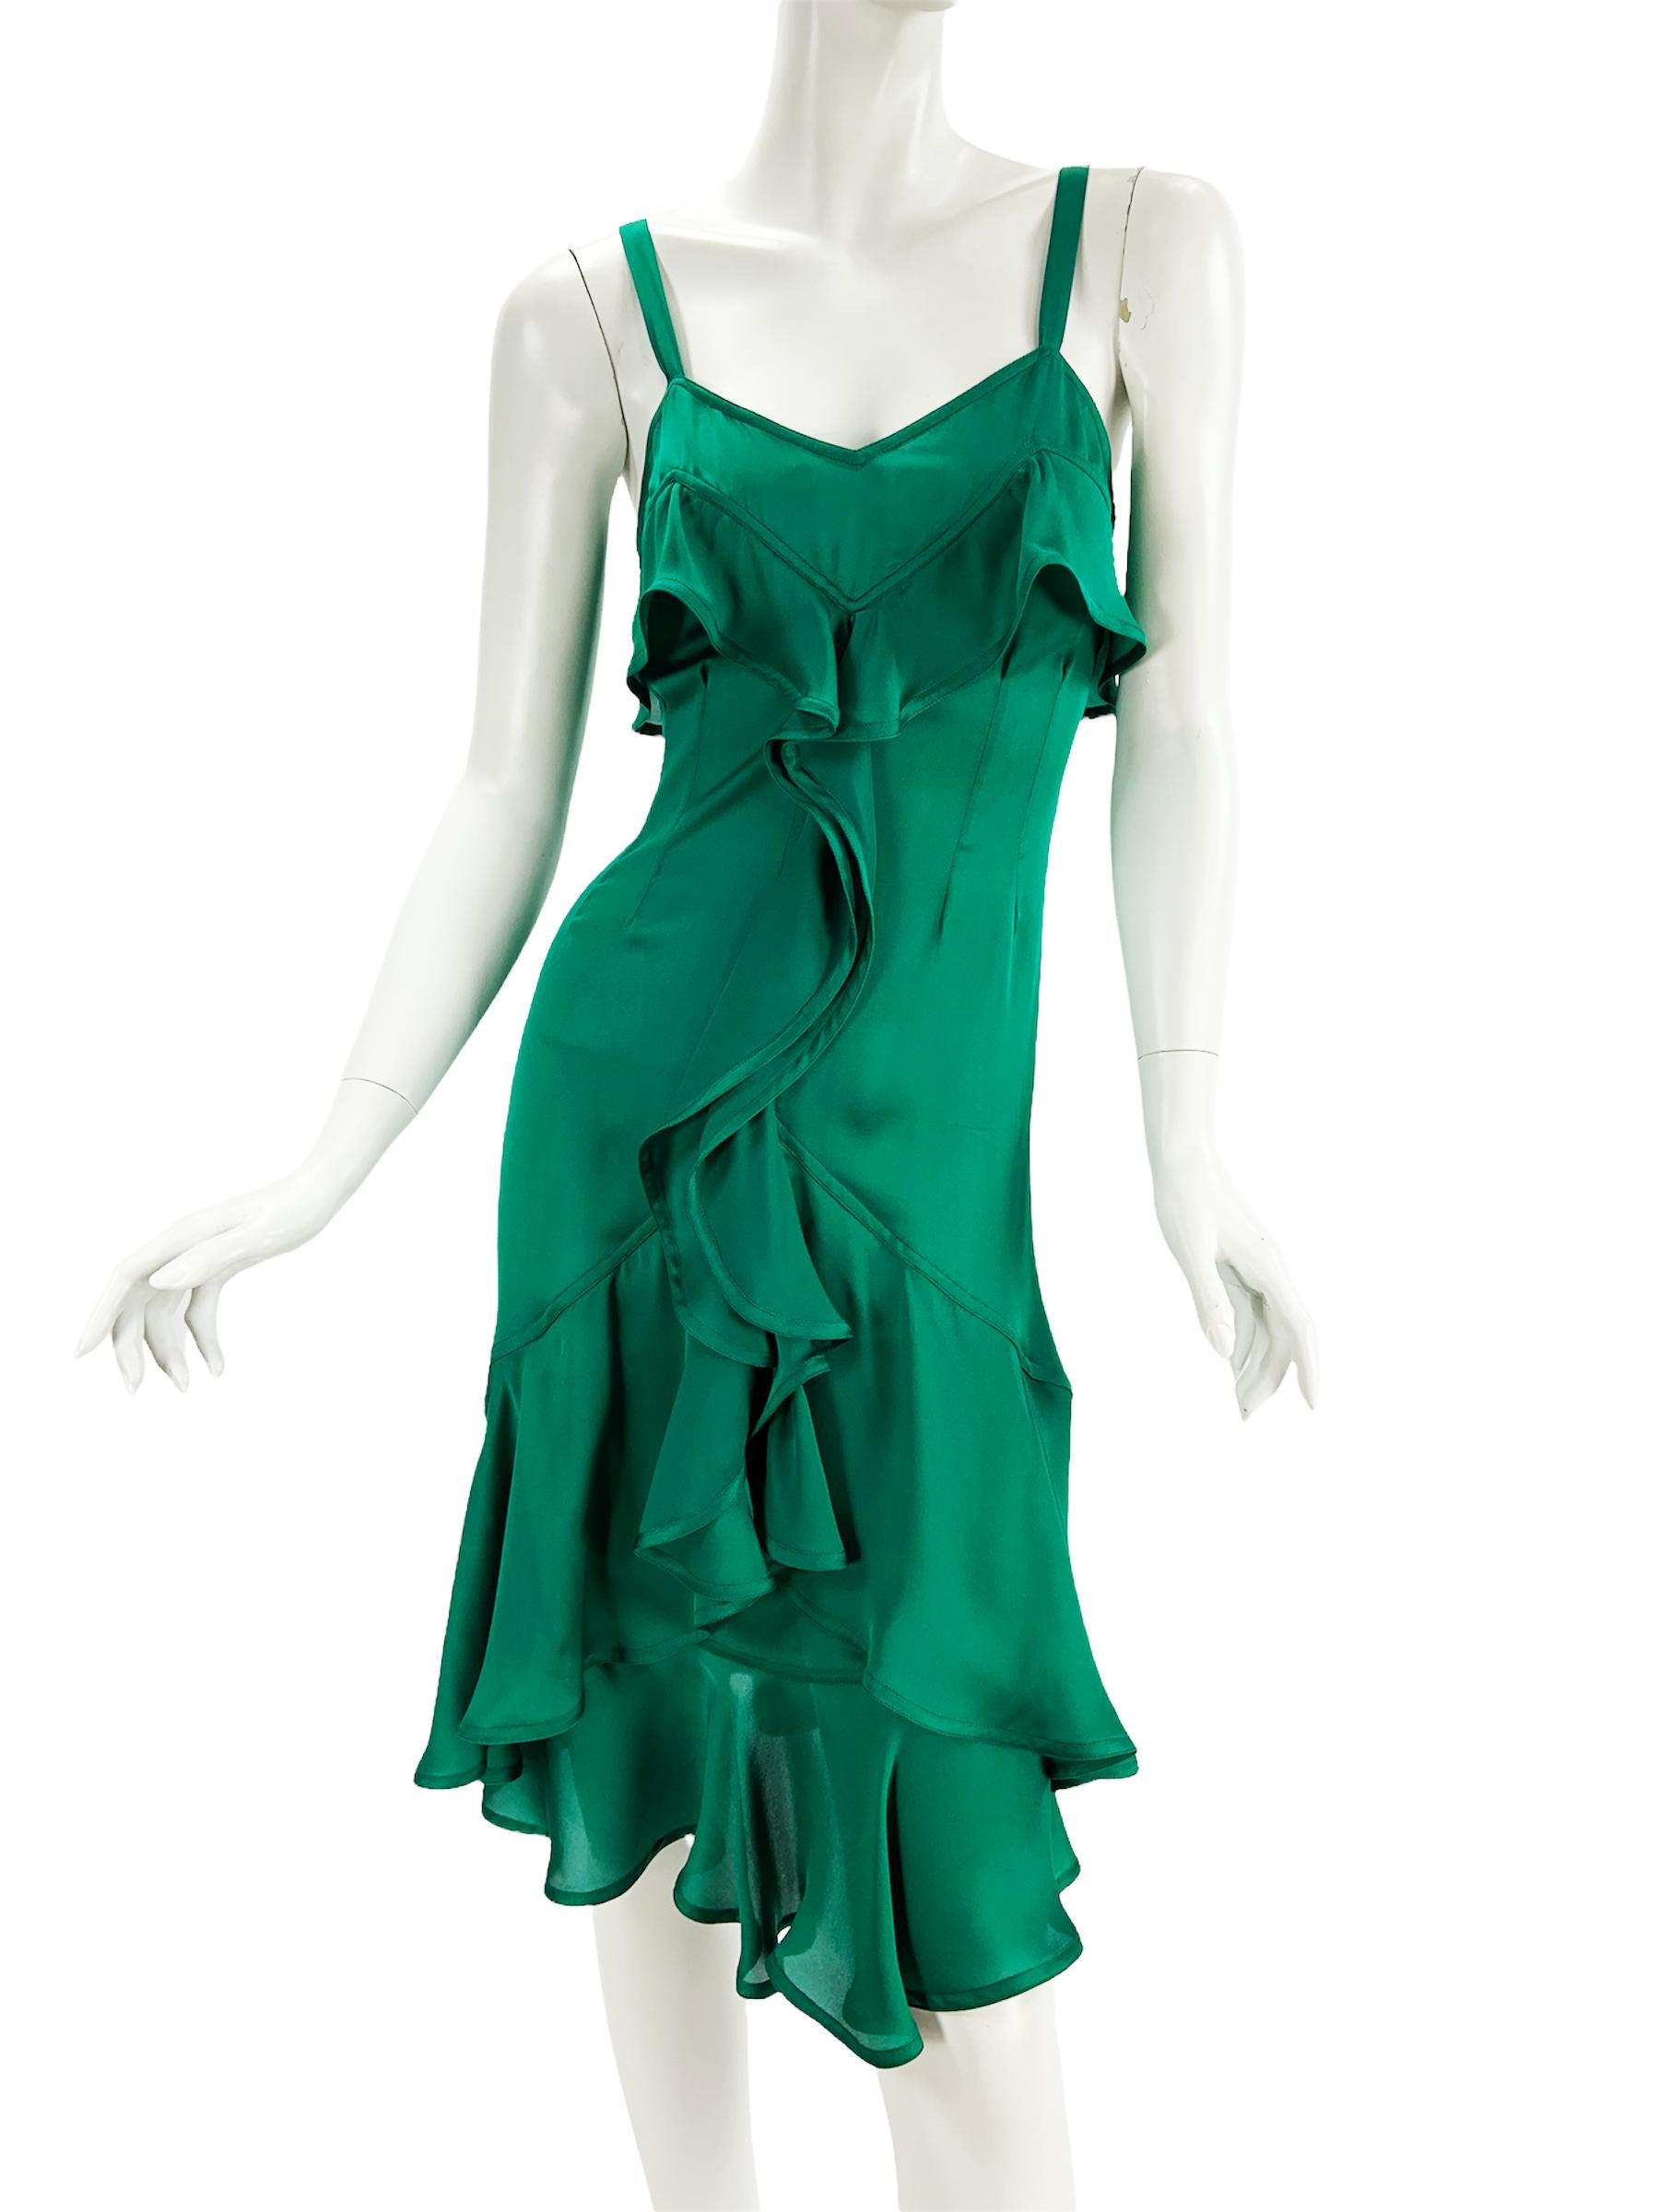 Tom Ford for Yves Saint Laurent AD Campaign F/W 2003 Silk Green Ruffle Dress   In Excellent Condition For Sale In Montgomery, TX